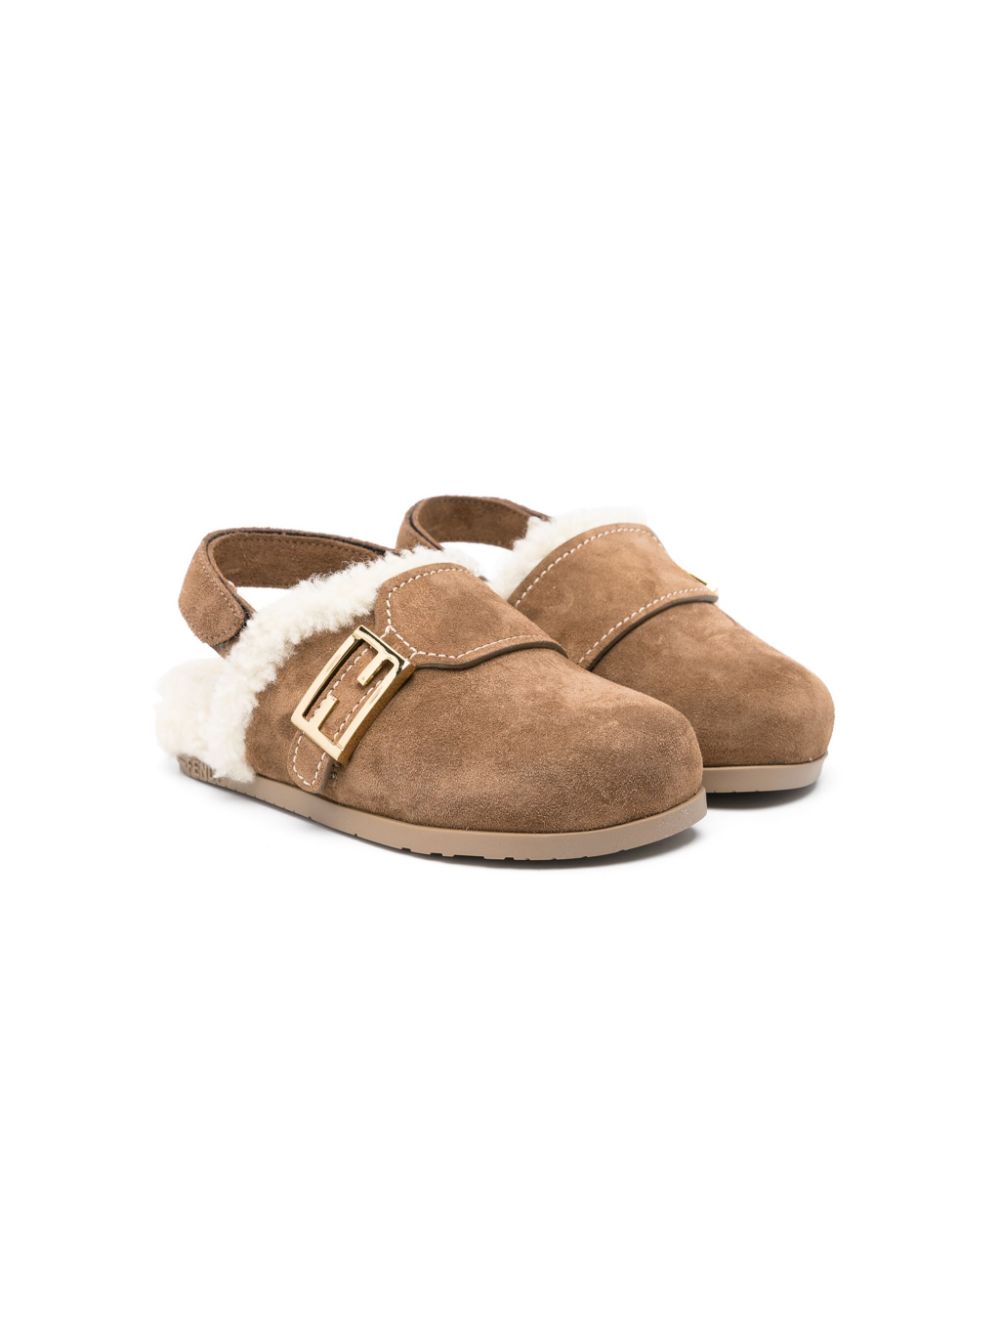 Beige leather sabot for girls with fur